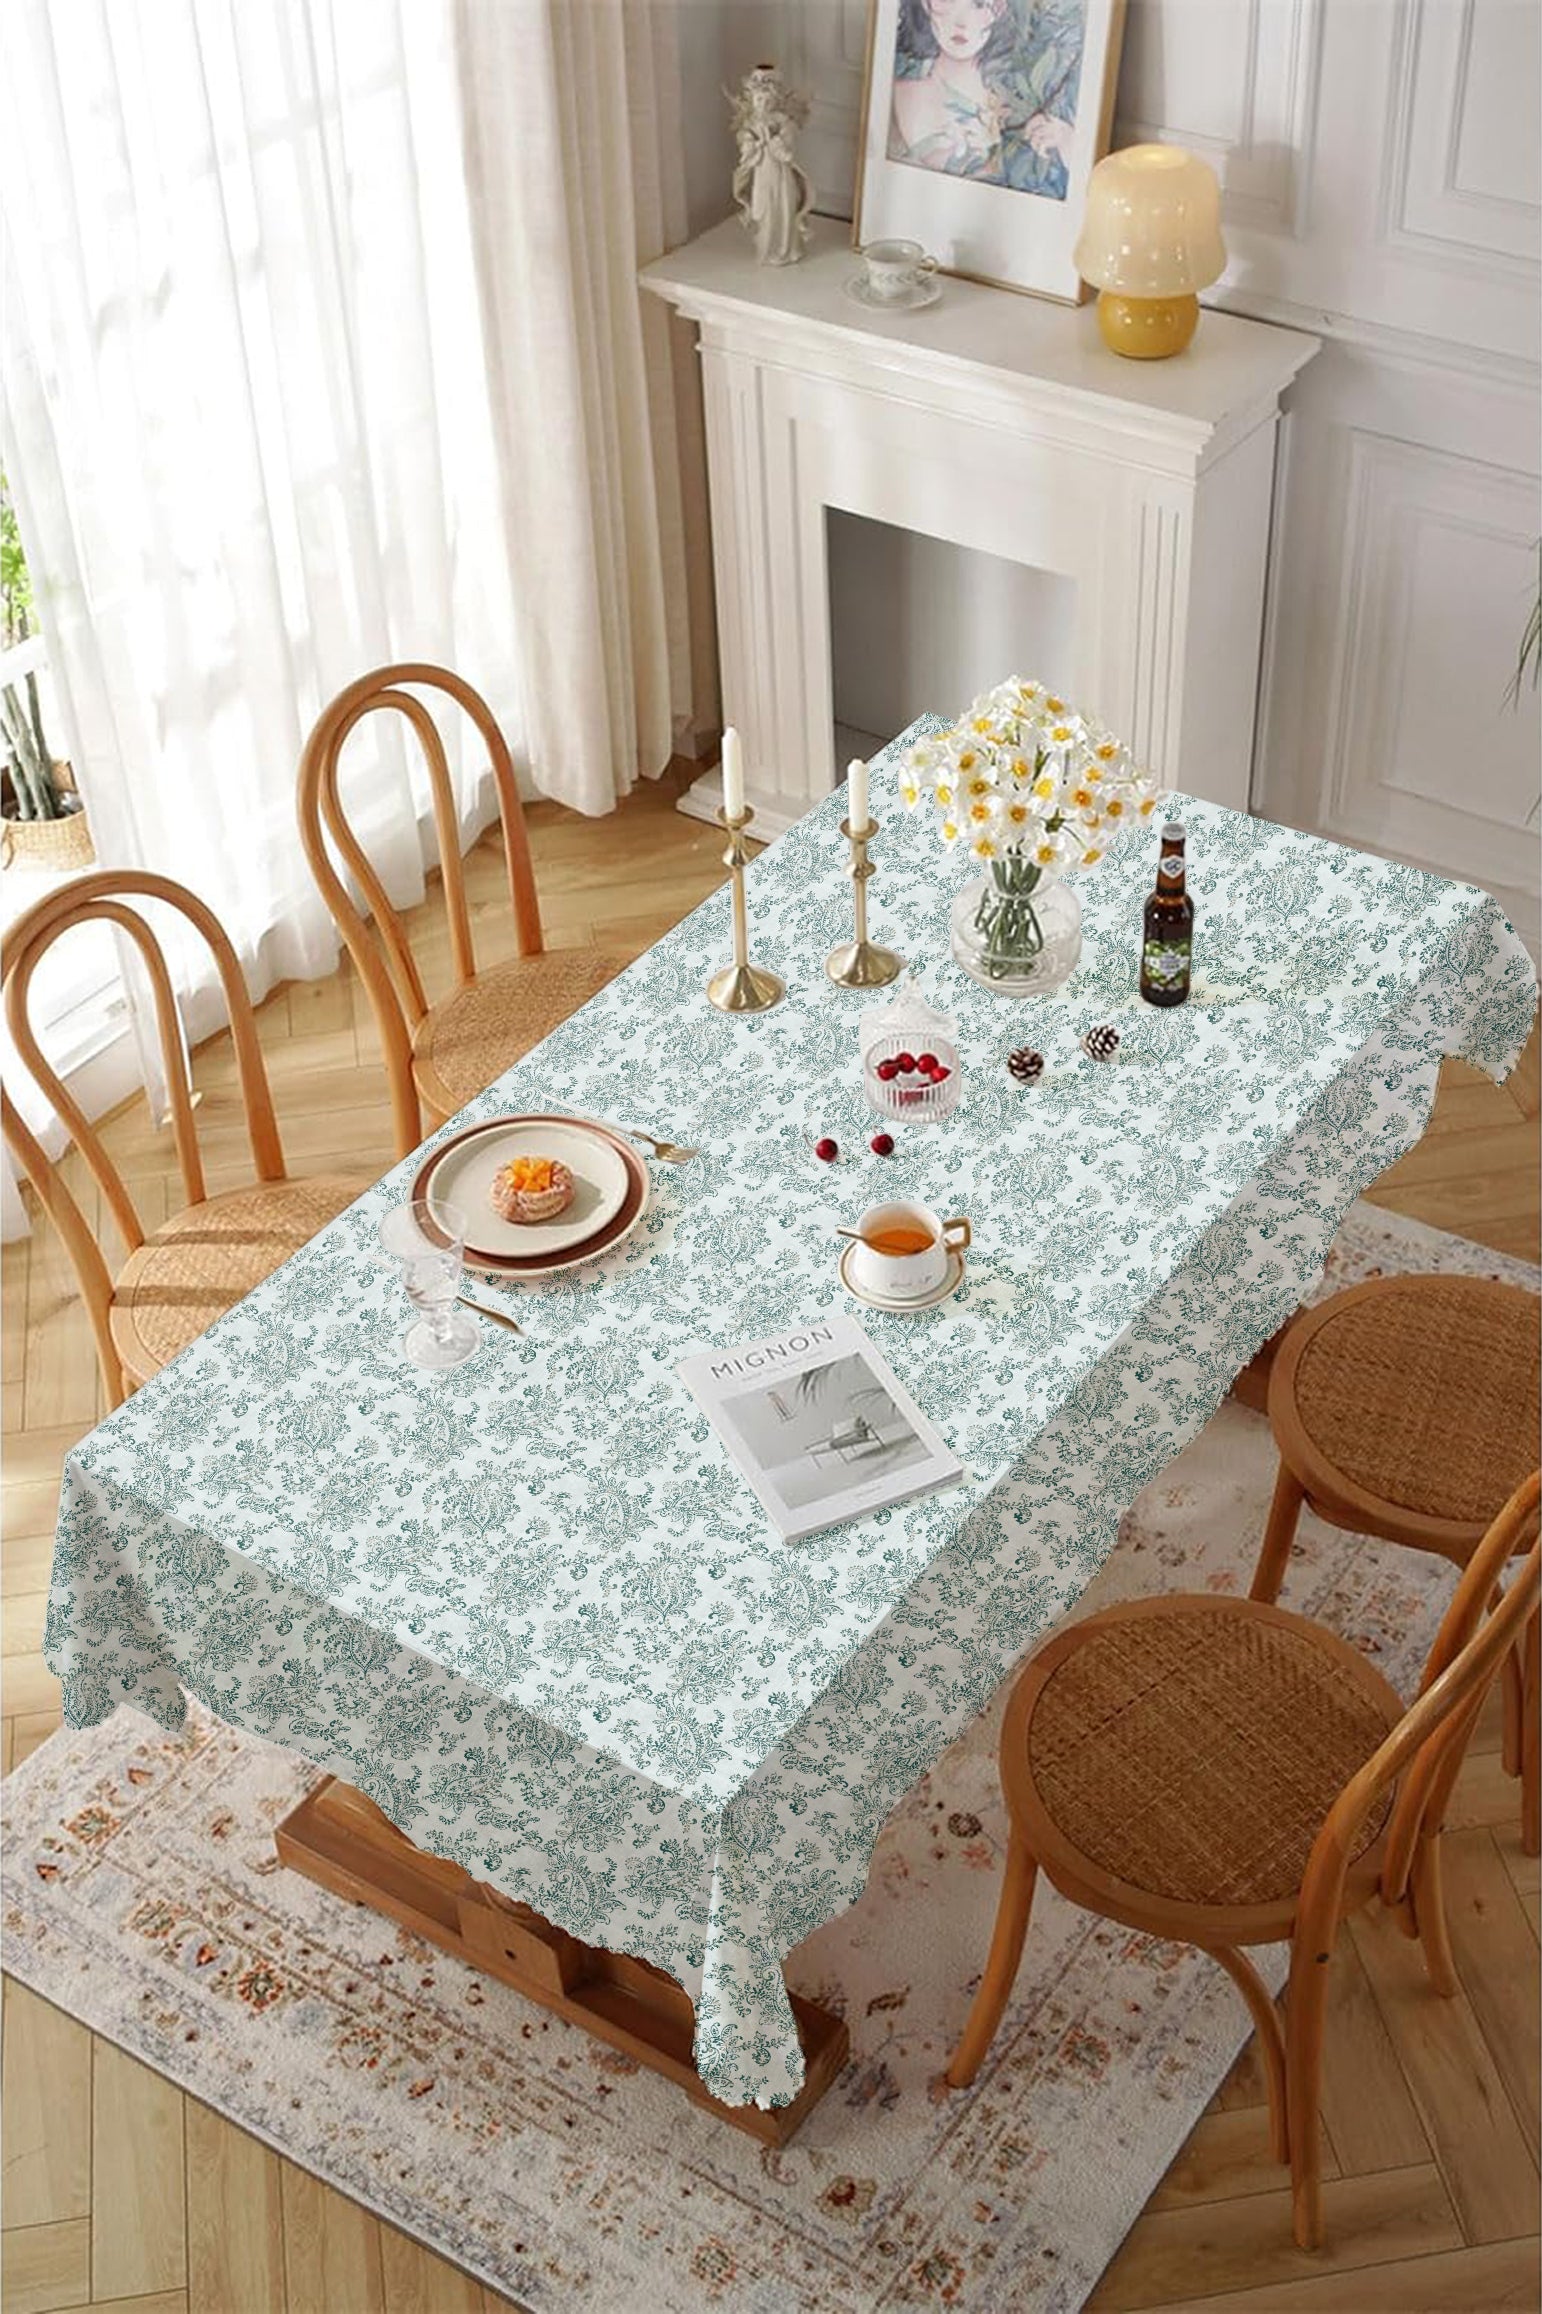 Jodhpur Flowers 6 Seater Table Cloth White And Teal